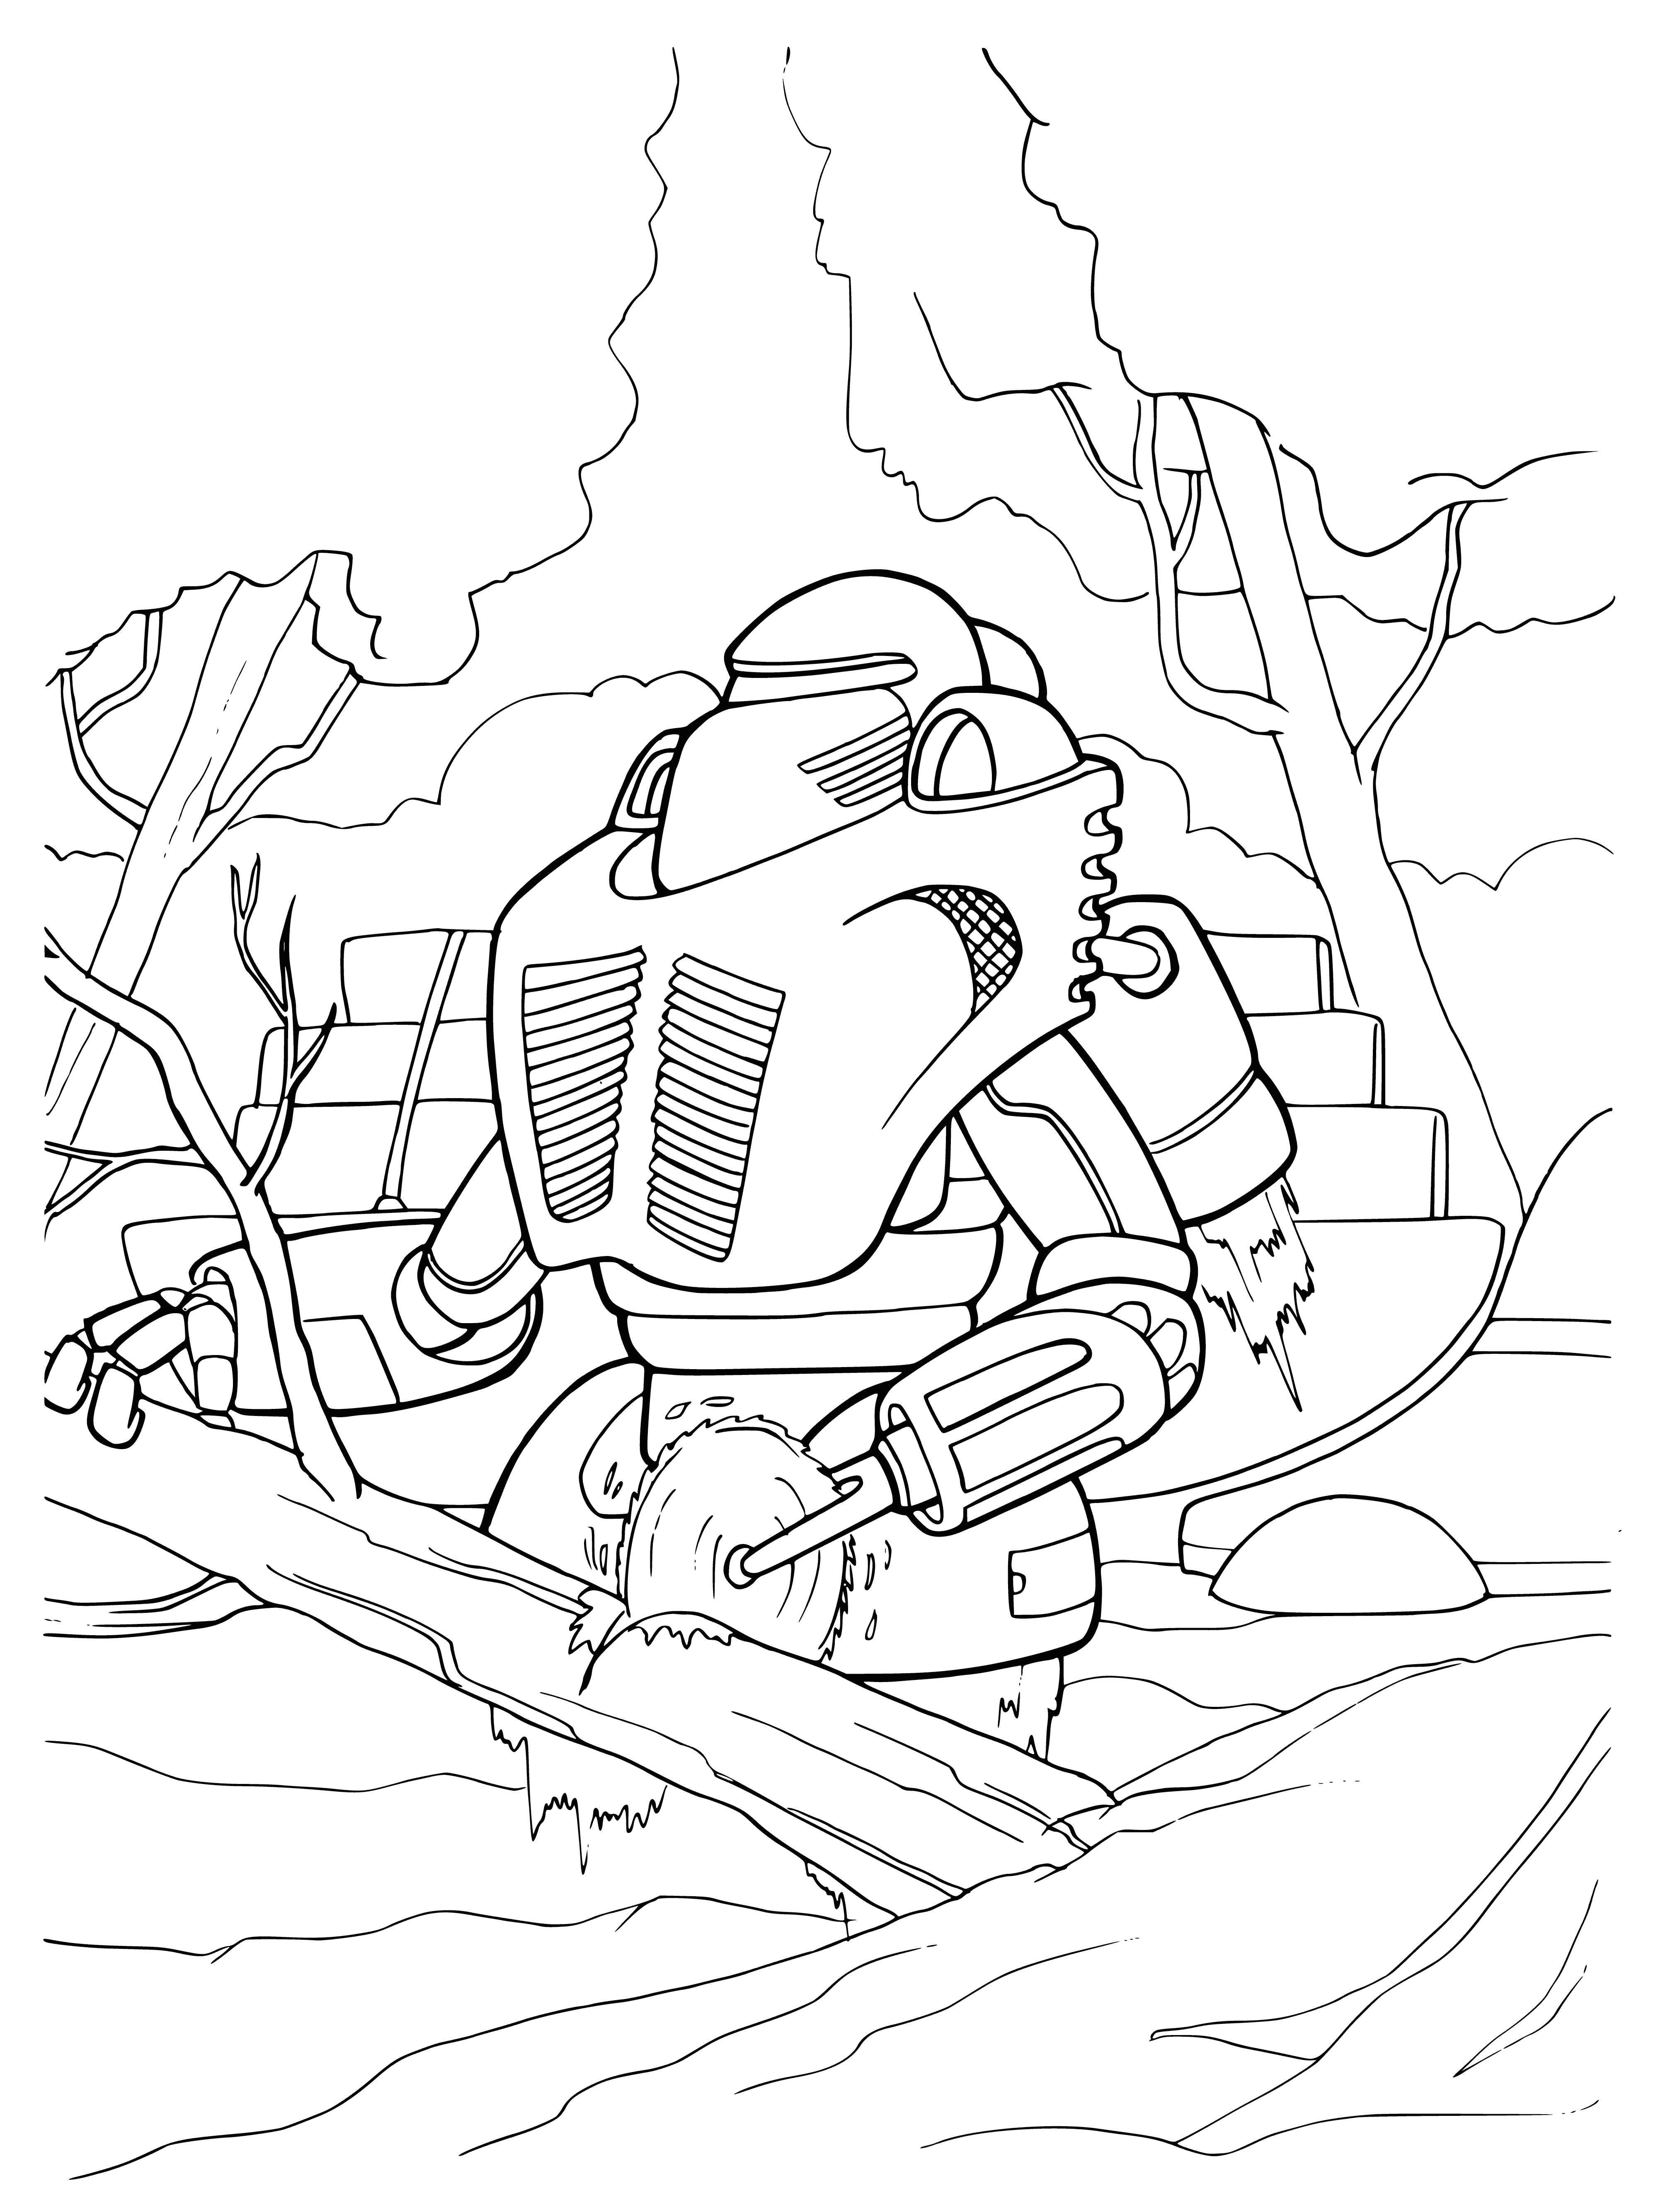 coloring page: Robotic tree feller with circular cutting blades, metal plating, powerful tracks, and sensors/cameras on its head. Green control panel on its chest.